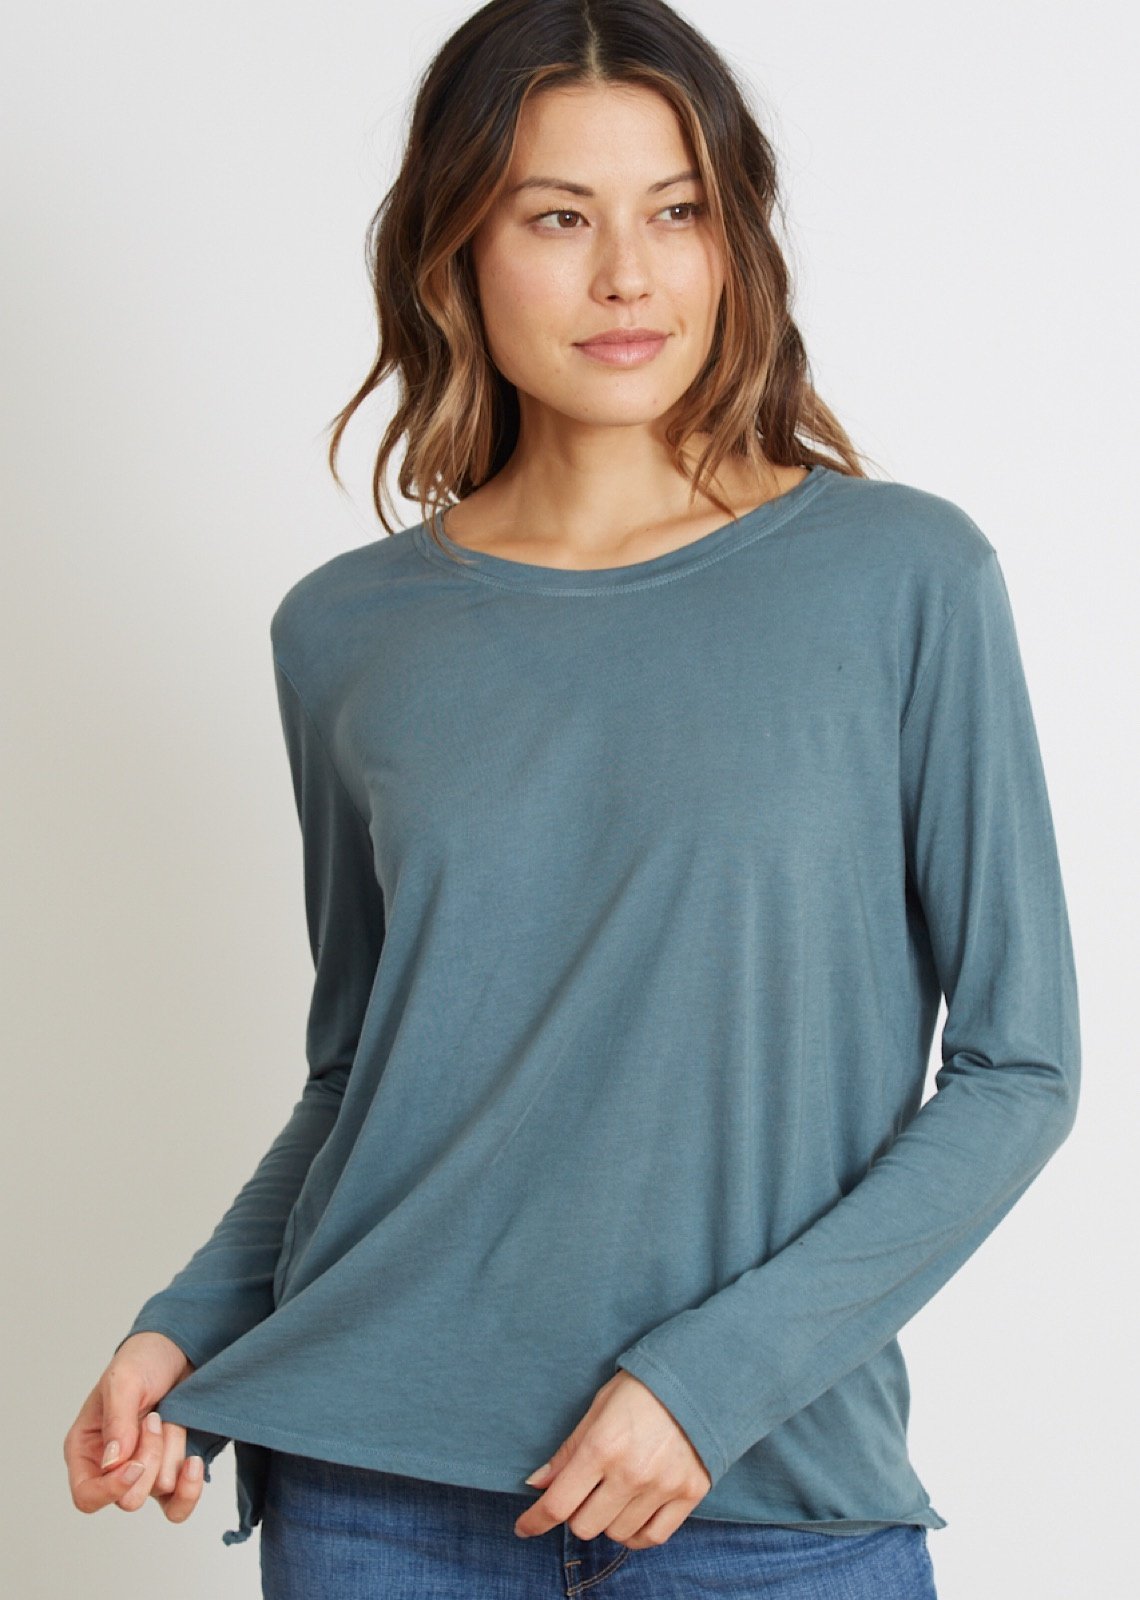 Green Classic Fit Long Sleeve - The Suzanne